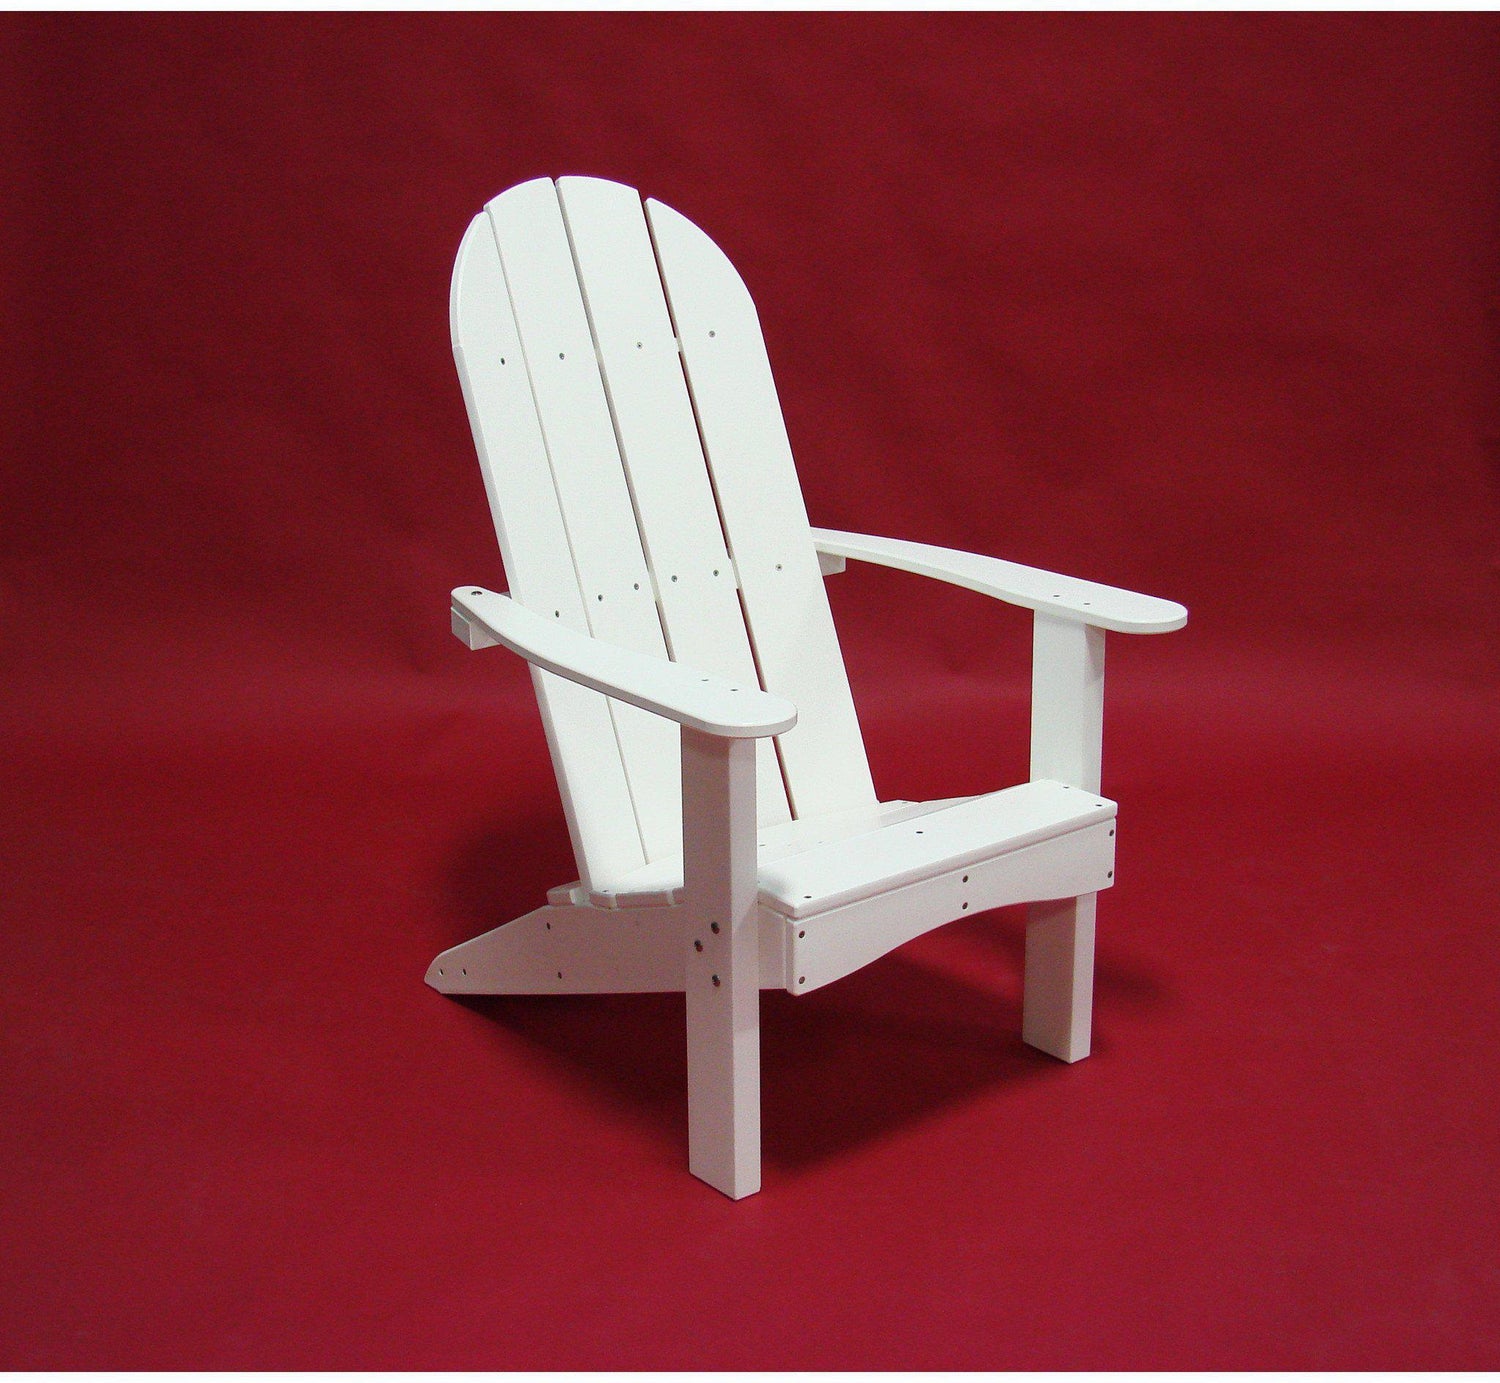 Tailwind Furniture Recycled Plastic Adirondack Chair Collection